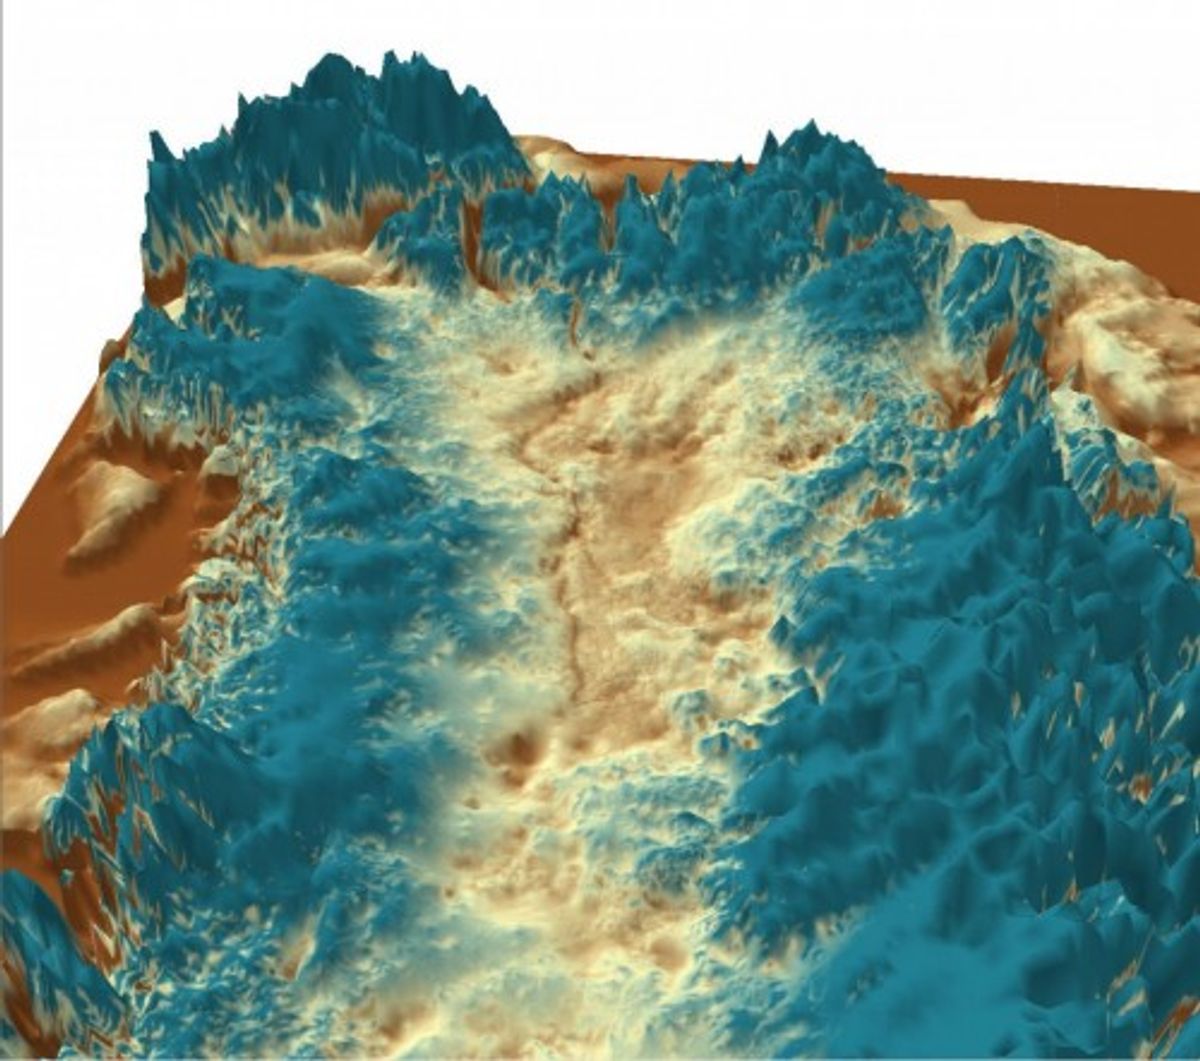  A 3-D rendering of the canyon buried under Greenland's ice sheet (J. Bamber, University of Bristol)